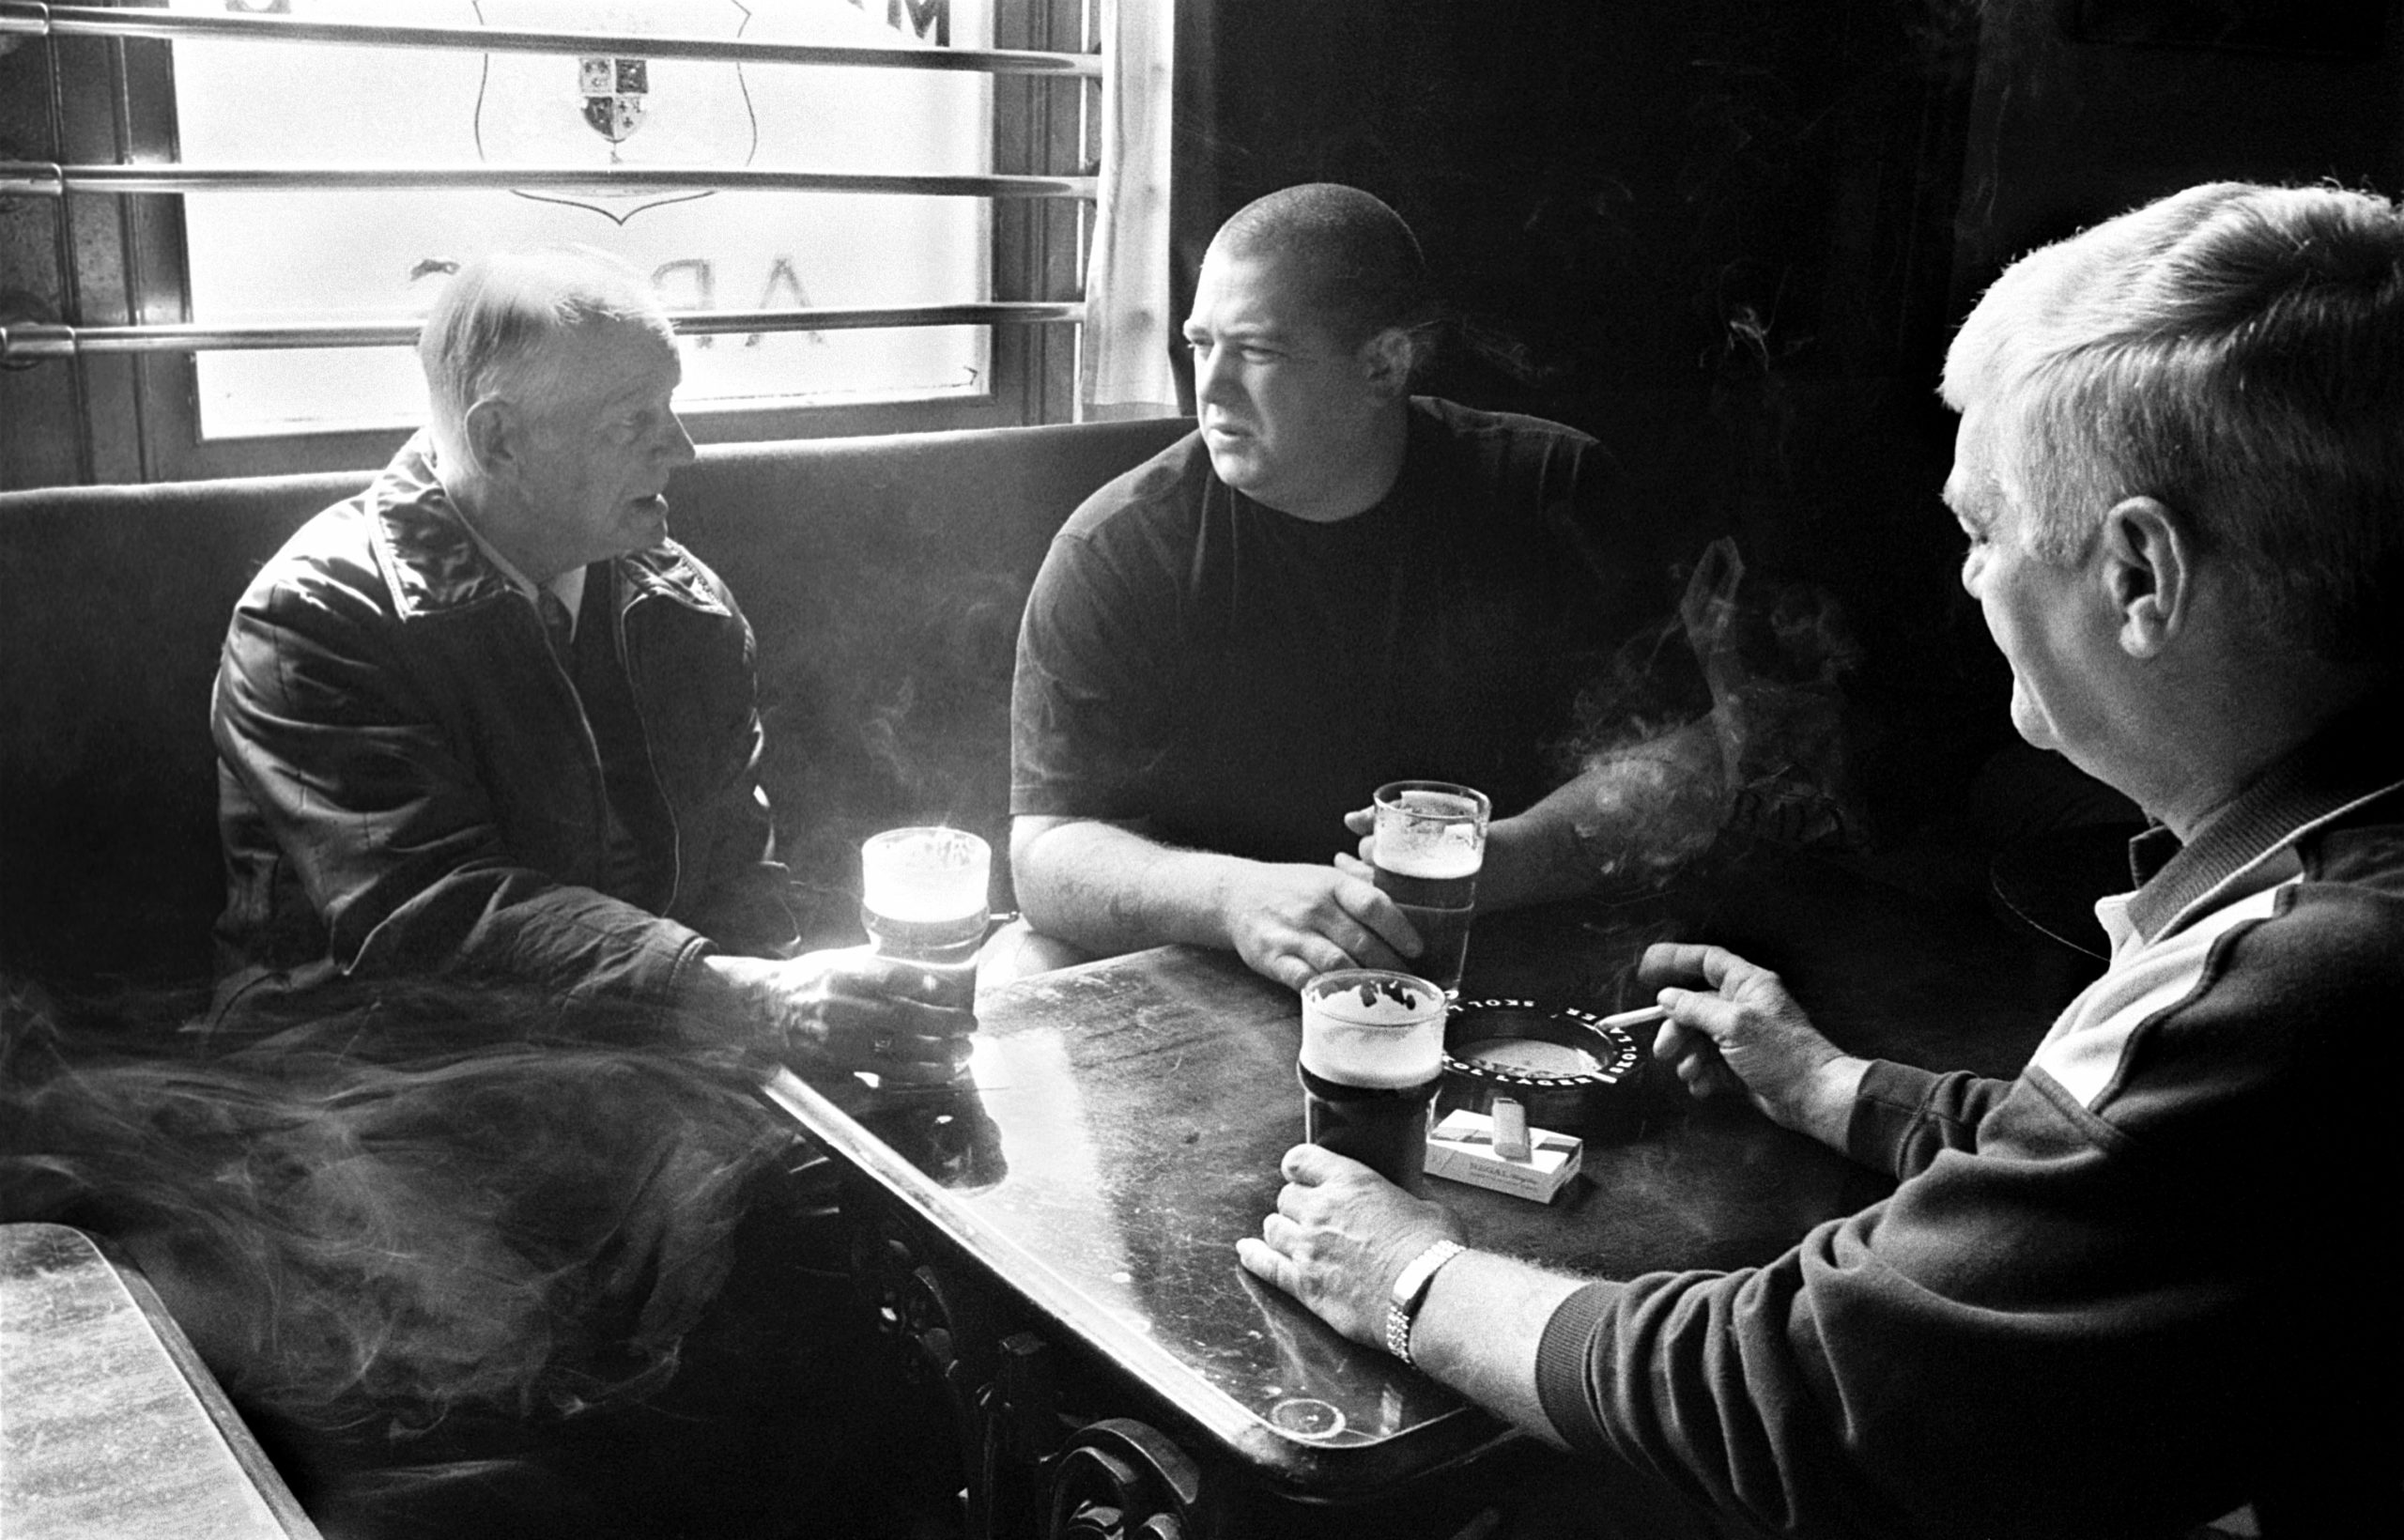 Three Scottish miners sit round a pub table drinking and smoking, light filters in the window. Image is black and white.